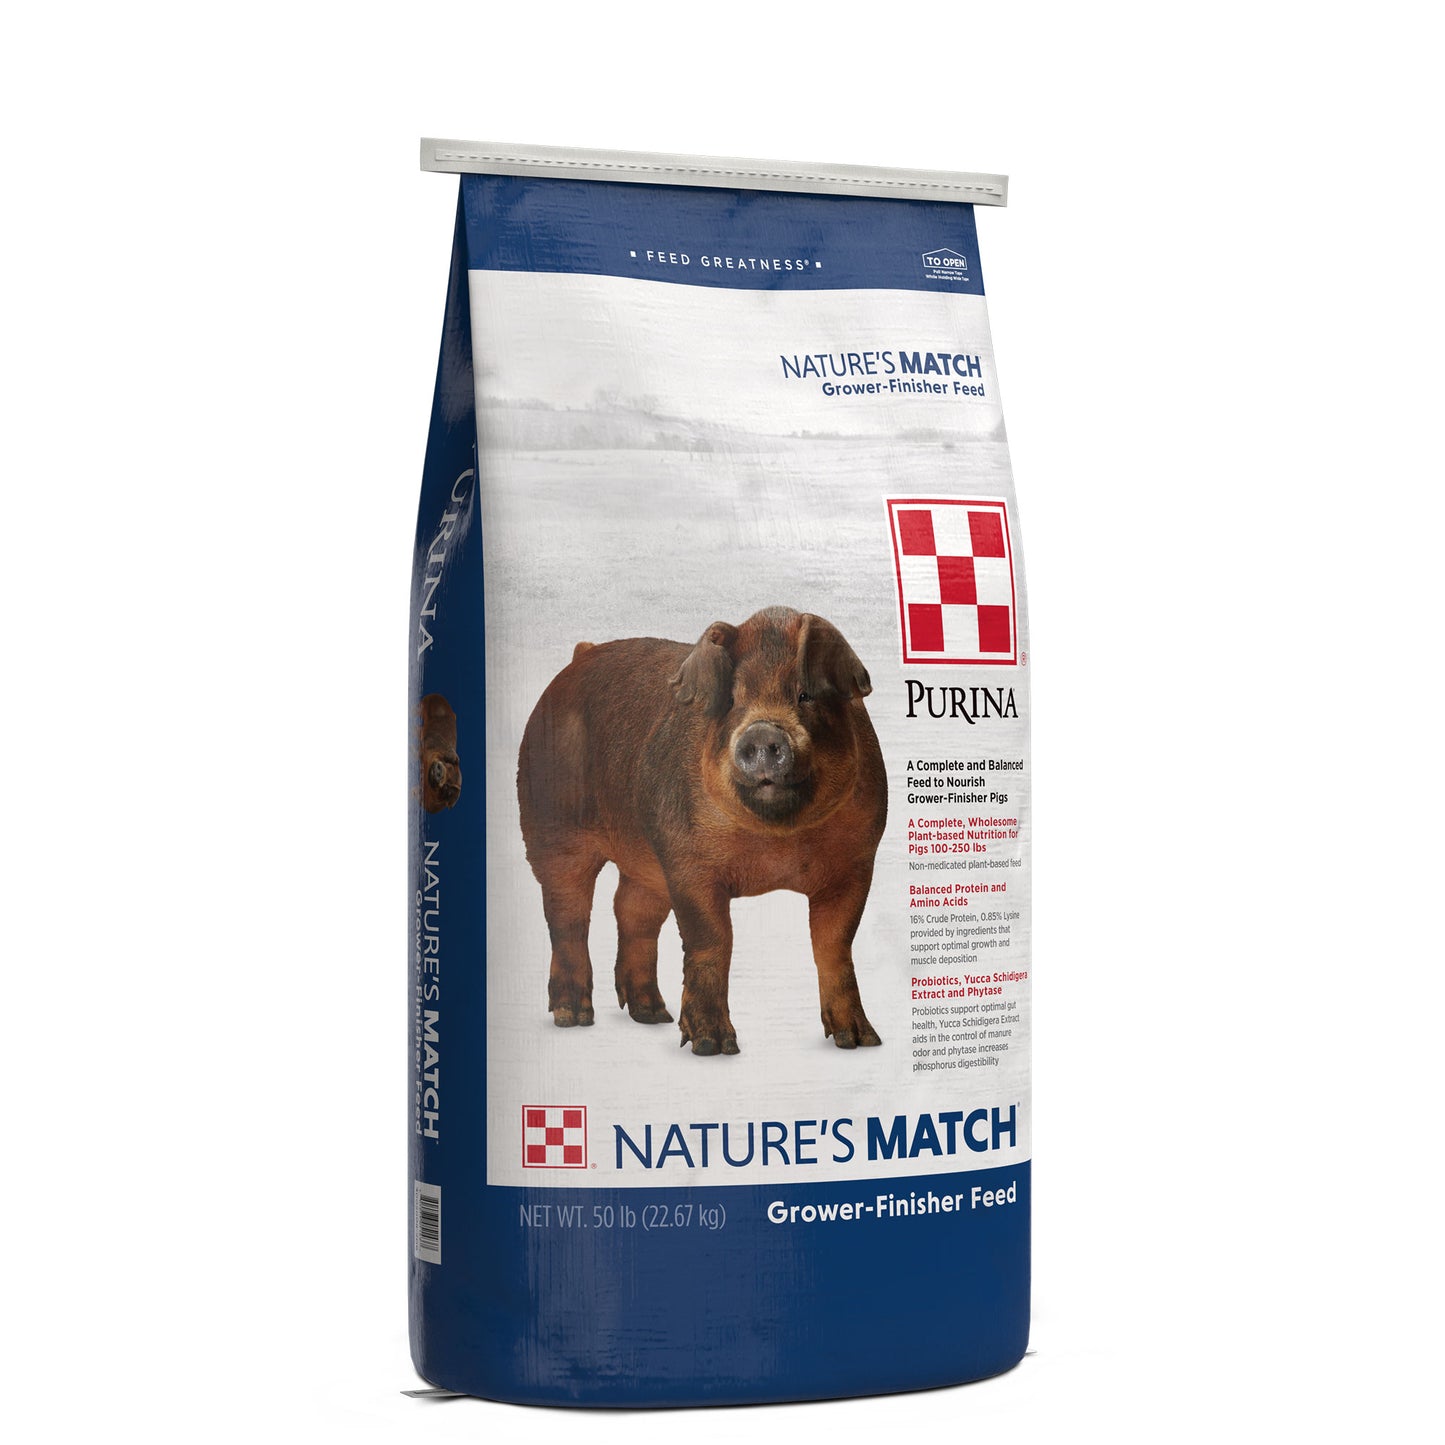 Left angle of Nature’s Match Grower-Finisher Swine Feed 50 Pound Bag